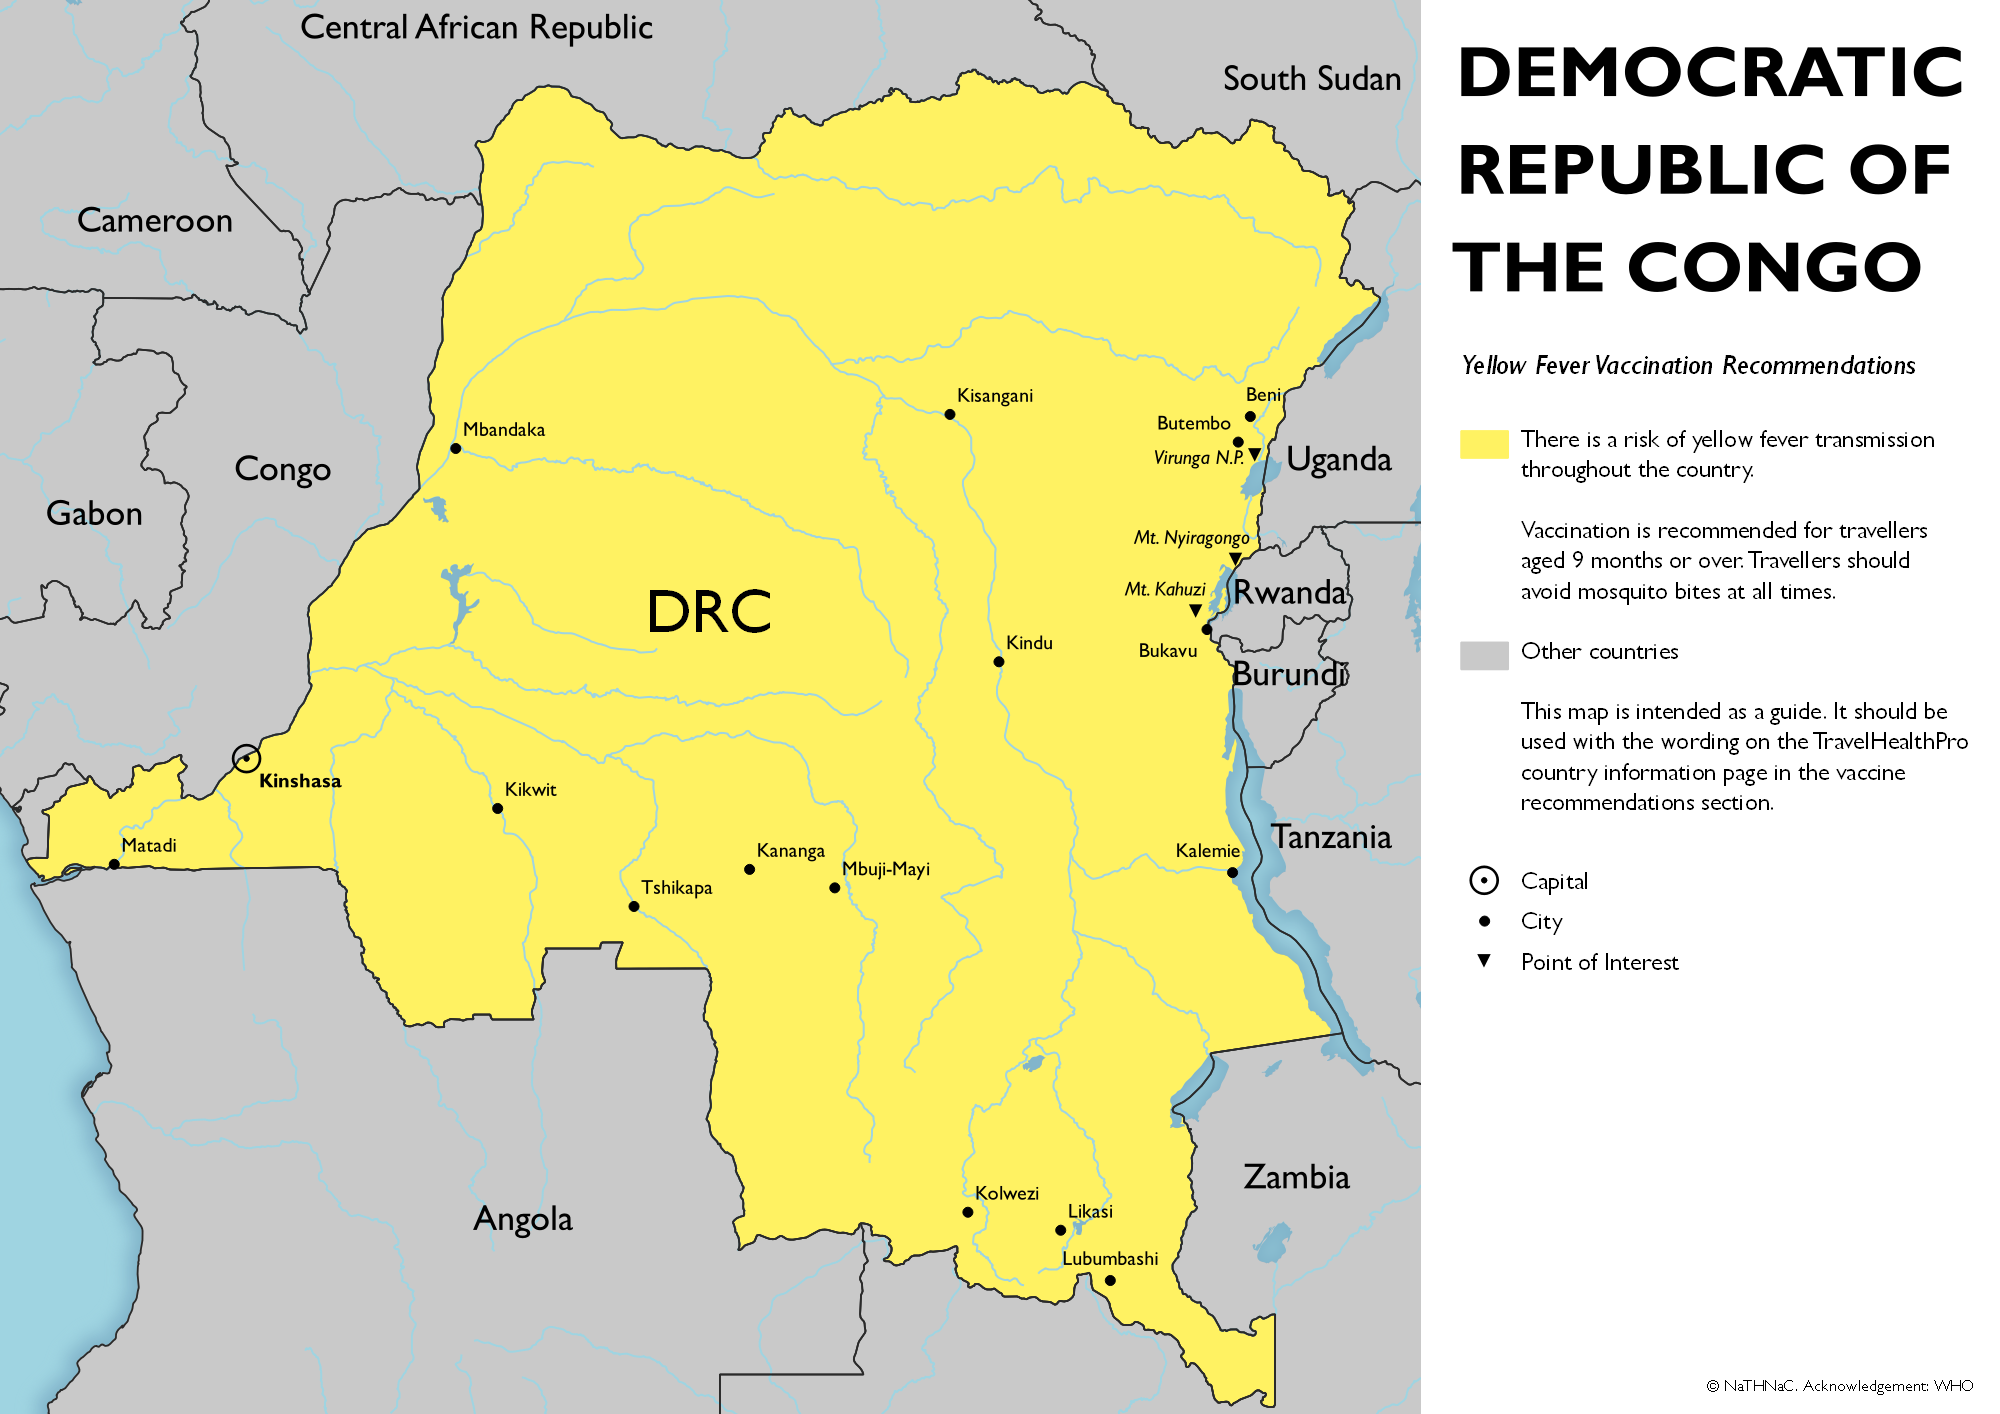 Yellow fever vaccine recommendation map for Democratic Republic of the Congo